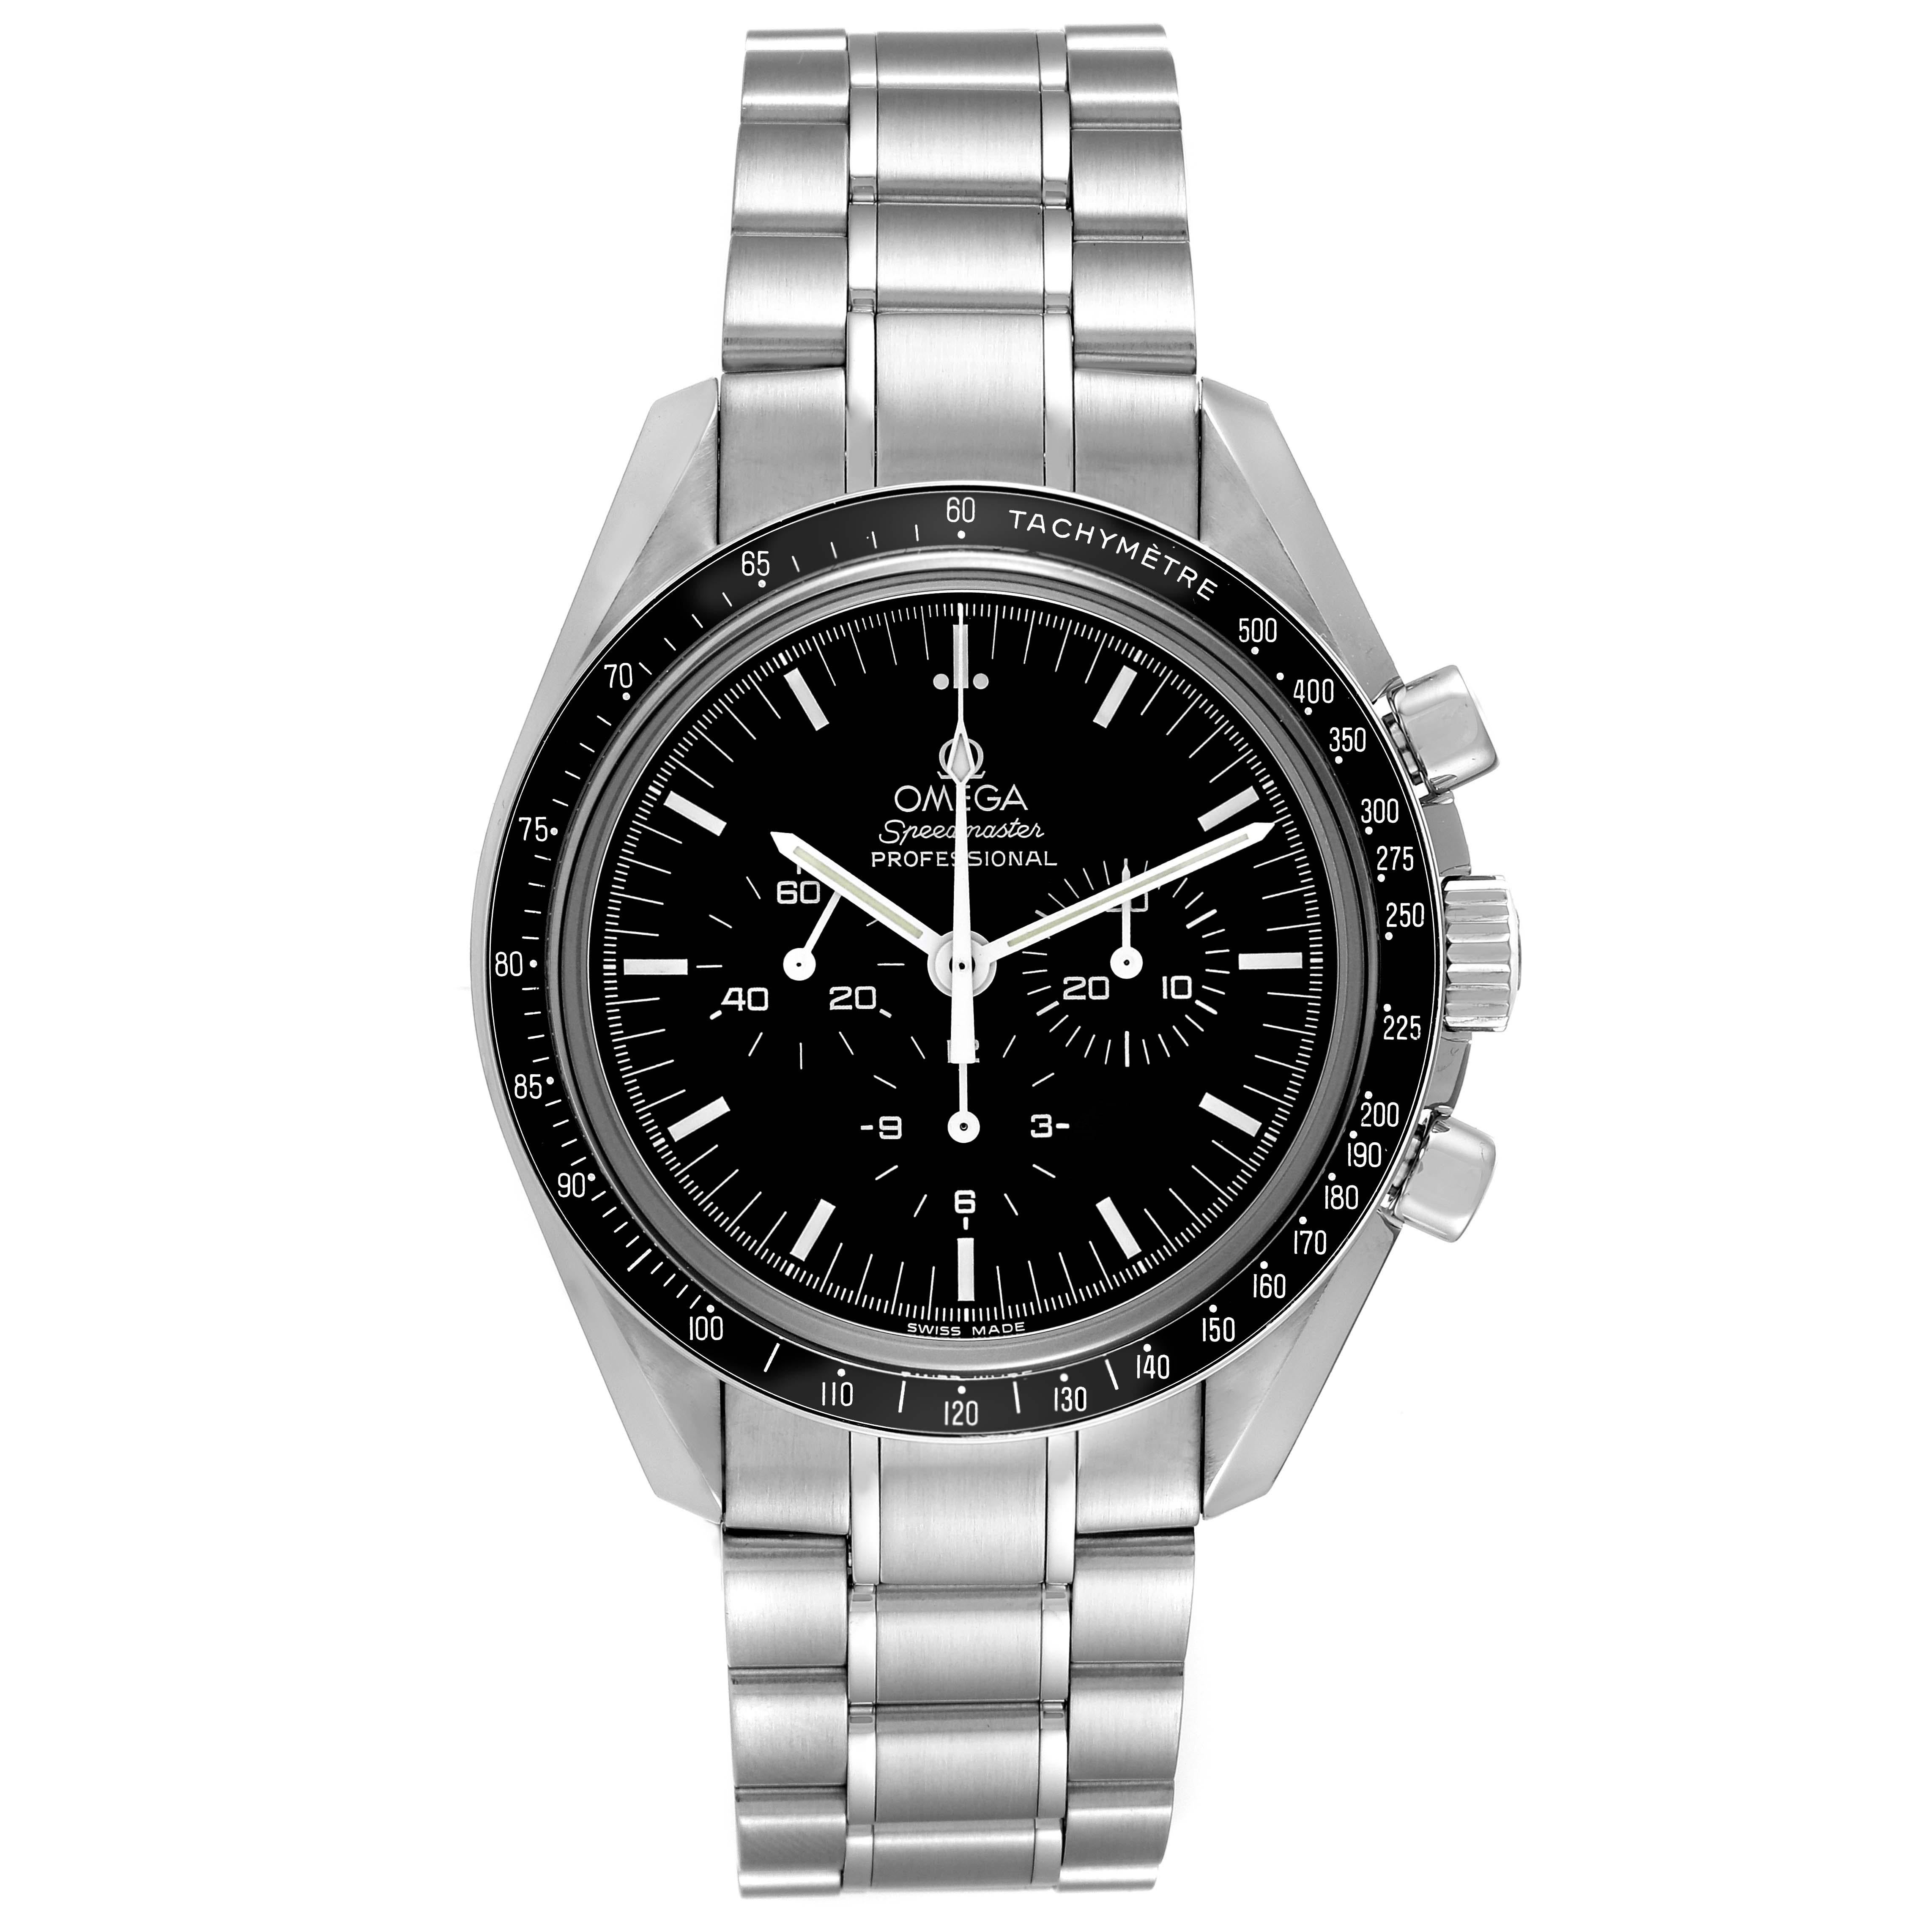 Omega Speedmaster Sapphire Sandwich Steel Mens MoonWatch 3573.50.00 Box Card. Manual winding chronograph movement. Stainless steel round case 42.0 mm in diameter. Transparent exhibition sapphire crystal caseback. Stainless steel bezel with